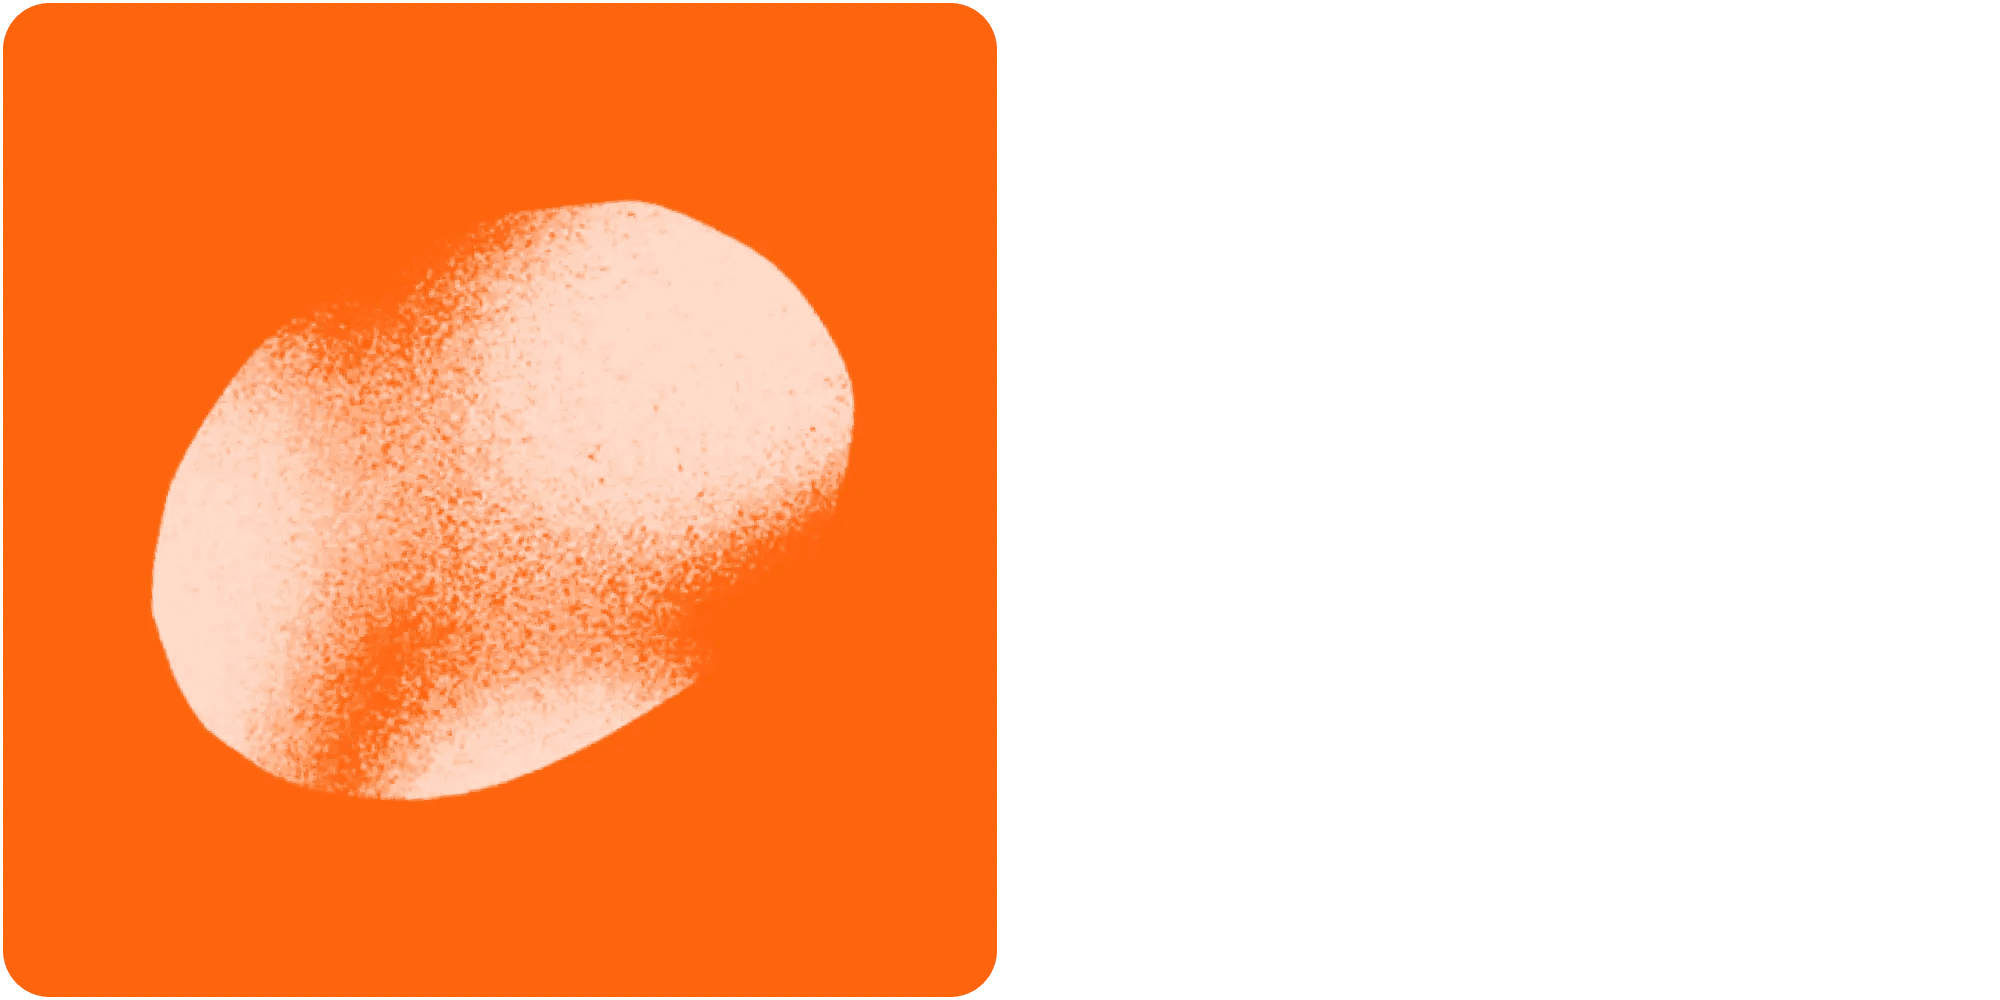 An abstract image with an orange background features a light, textured, oval shape towards the center-left, resembling a brushstroke or smudge.